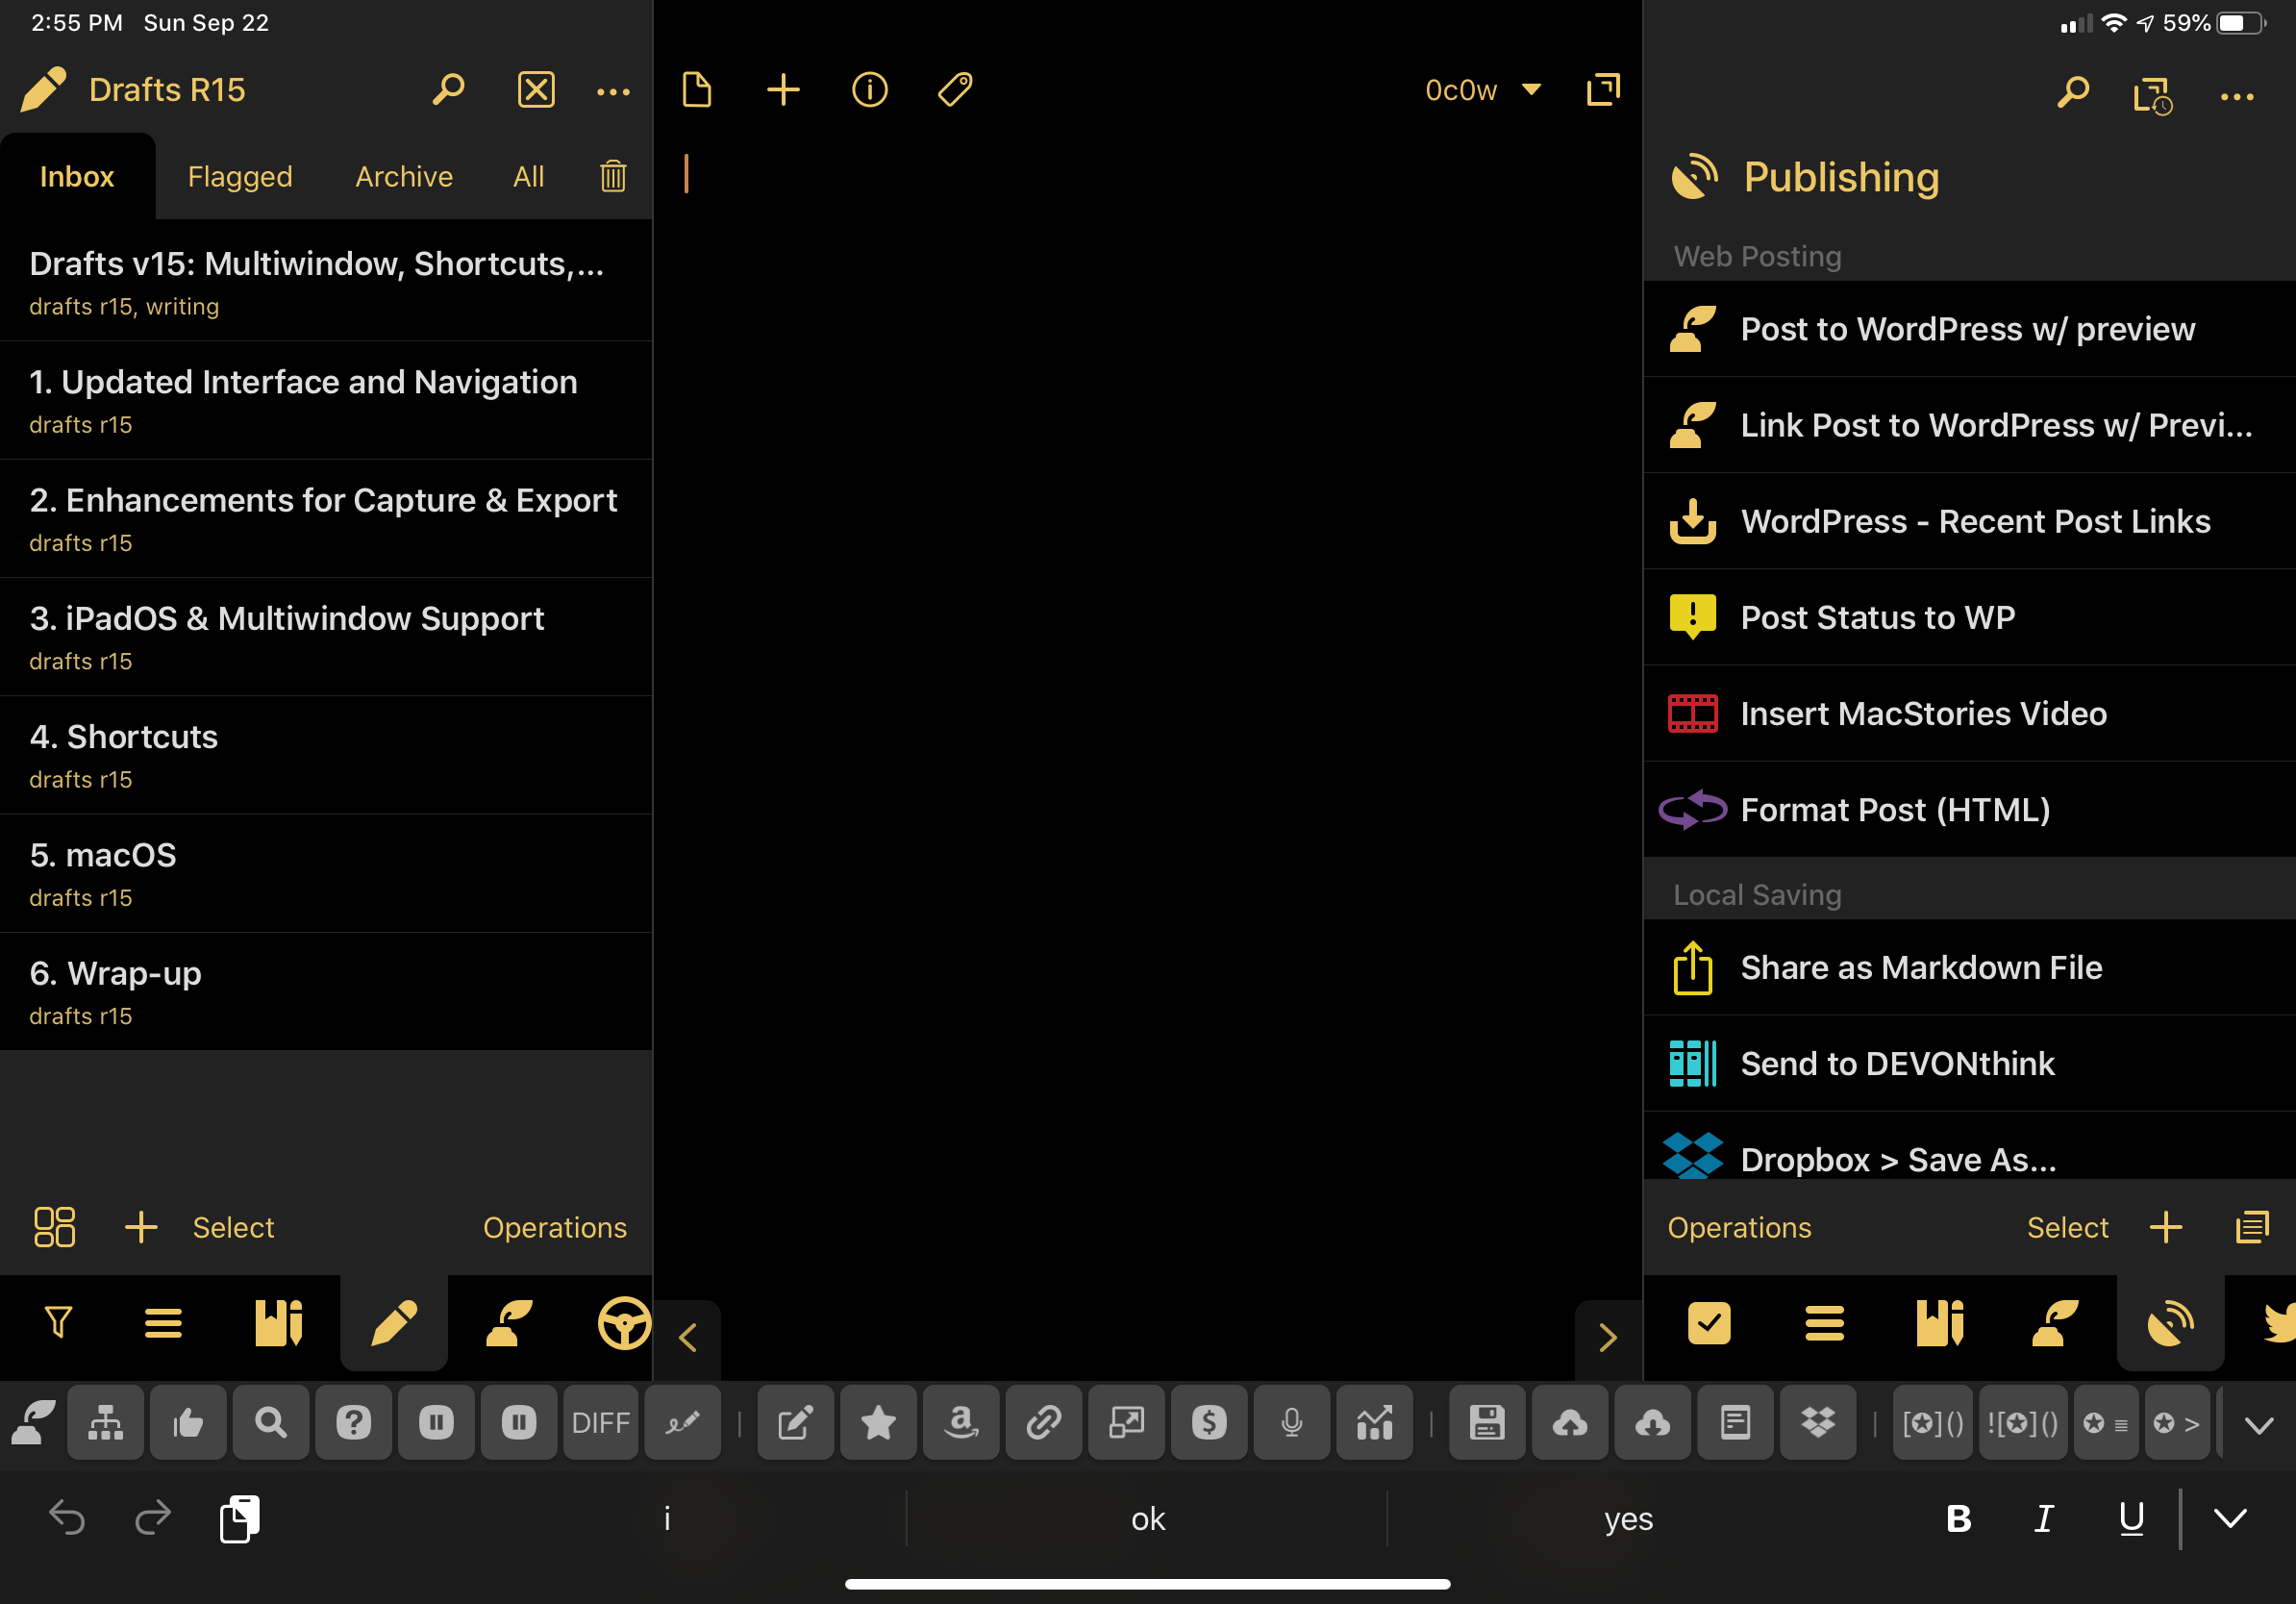 It is now possible to have both the draft and action drawers pinned, which is fantastic on the iPad Pro.